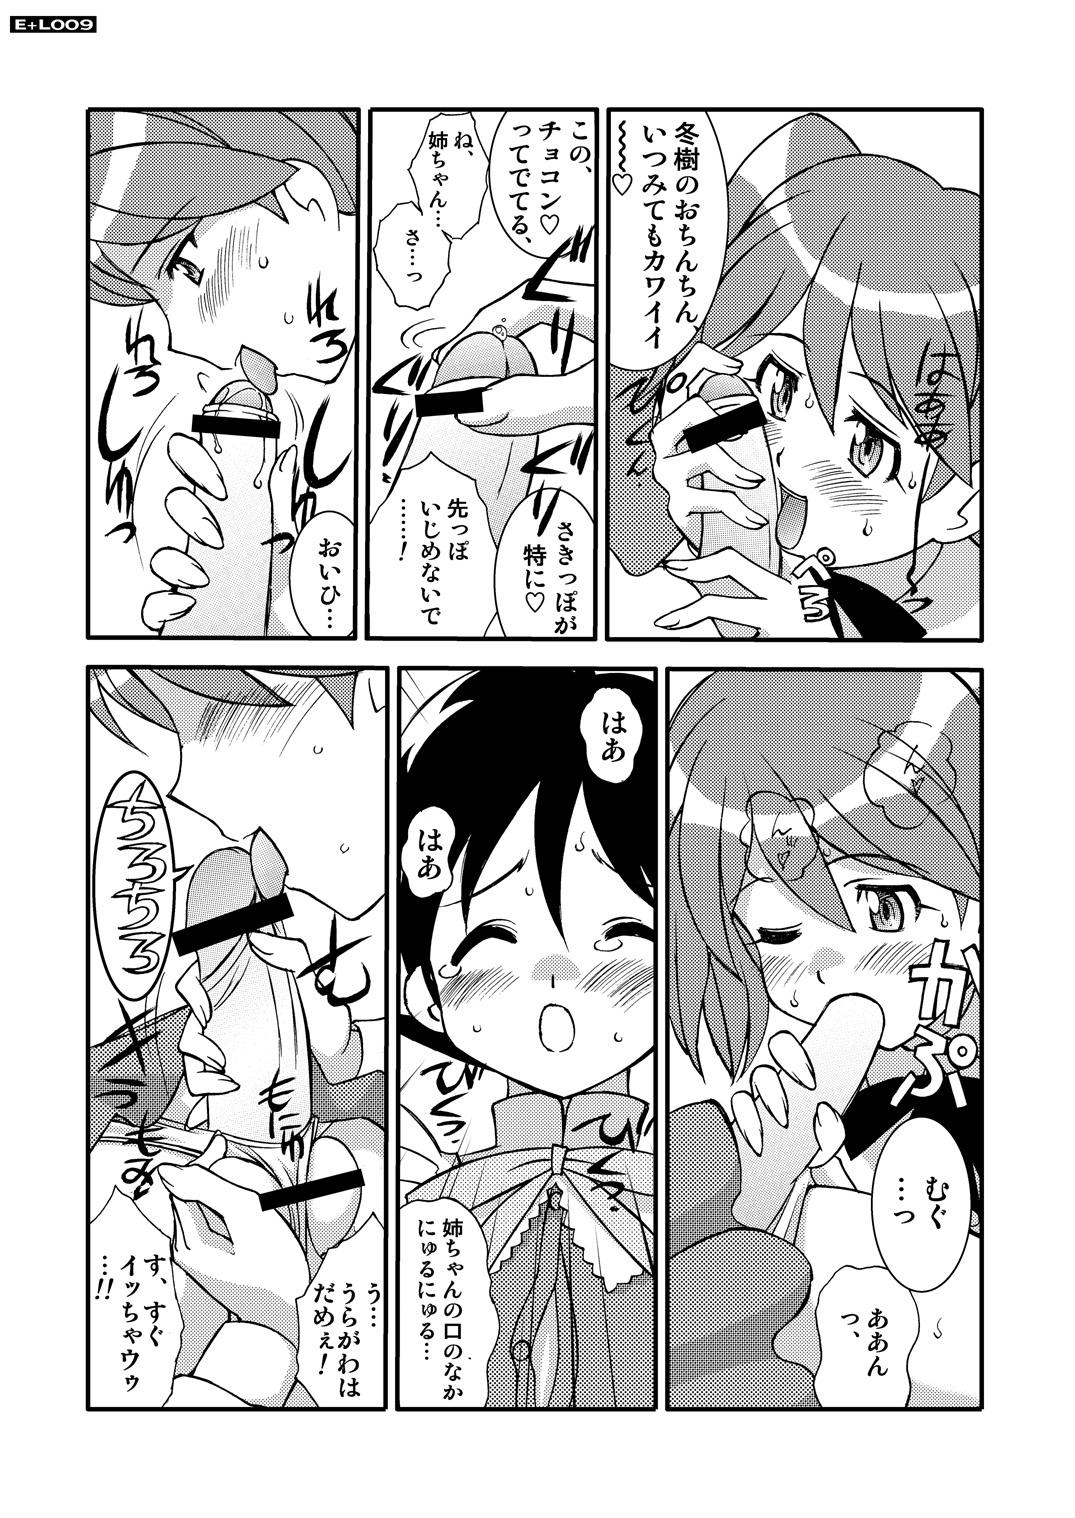 Free Amatuer Porn Energetic Love - Keroro gunsou Brother - Page 8